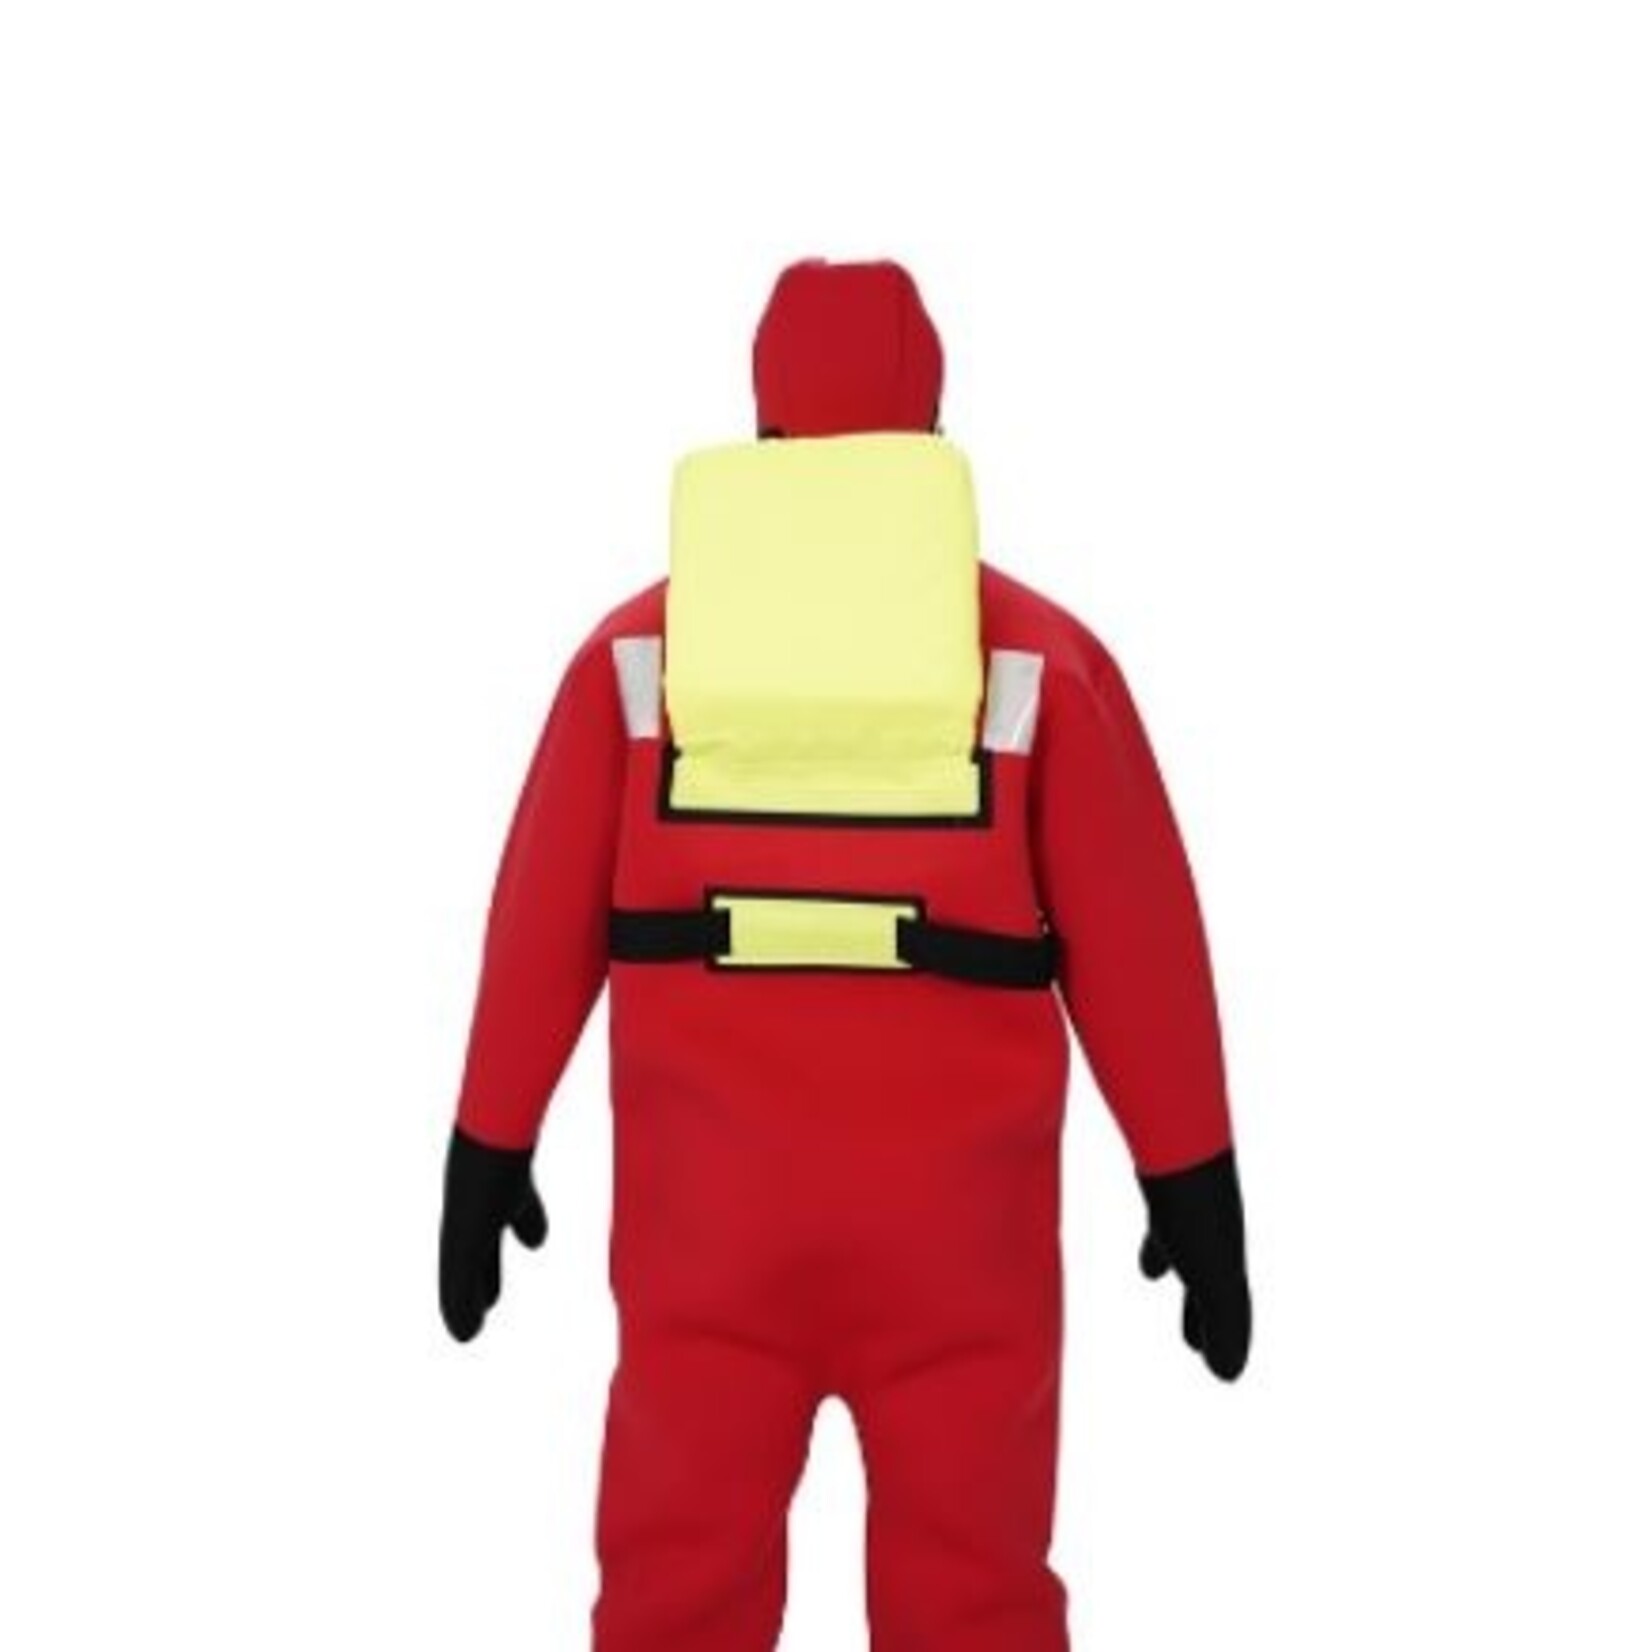 Plastimo Insulated immersion suit type l